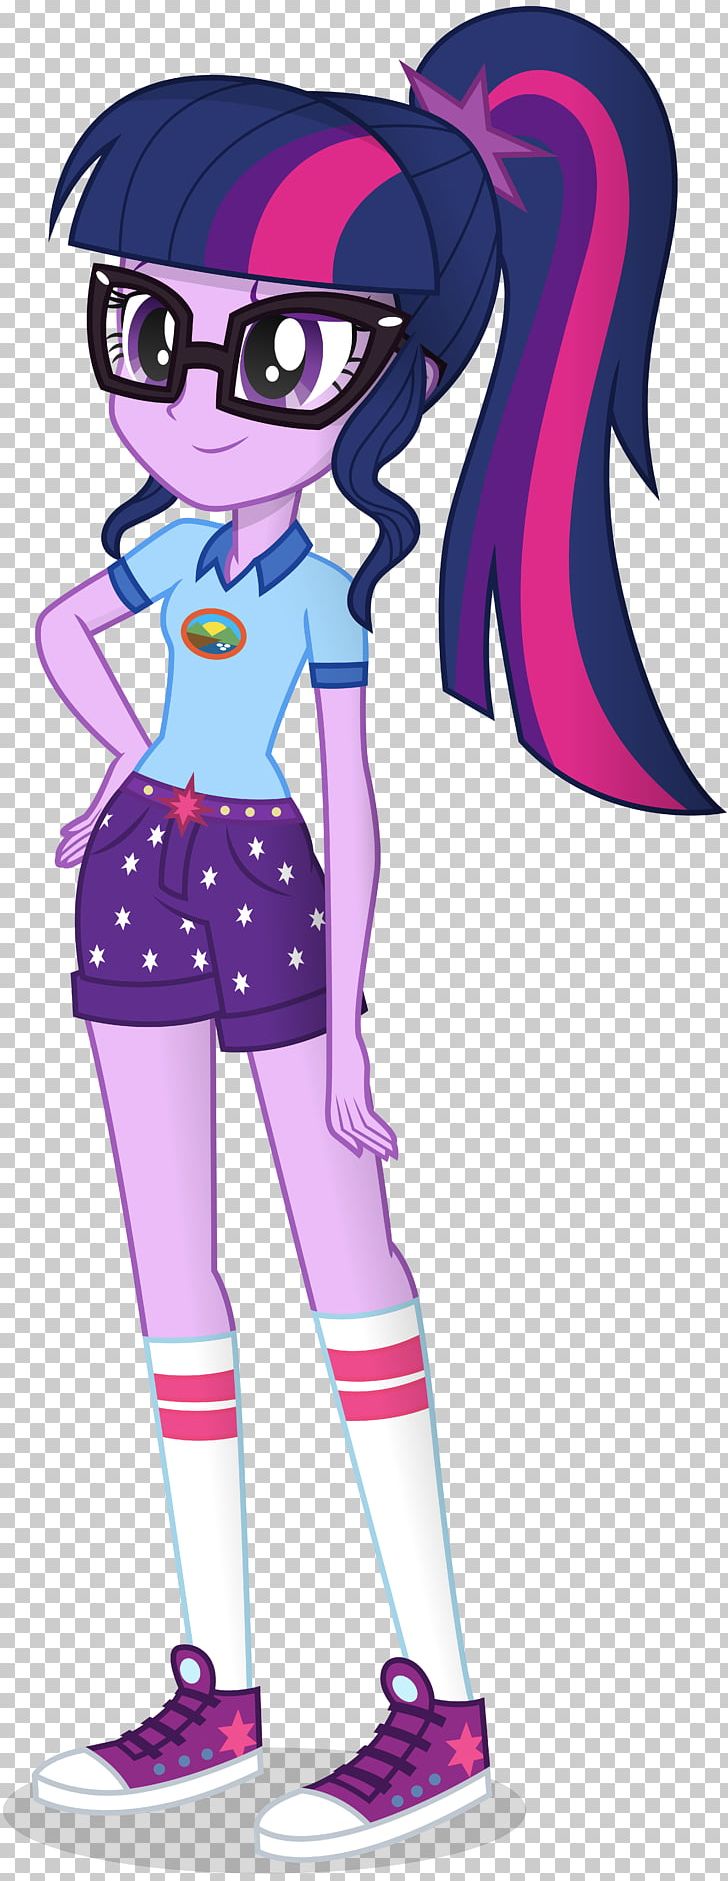 Twilight Sparkle Pinkie Pie Rainbow Dash Rarity My Little Pony: Equestria Girls PNG, Clipart, Anime, Cartoon, Deviantart, Equestria, Fictional Character Free PNG Download